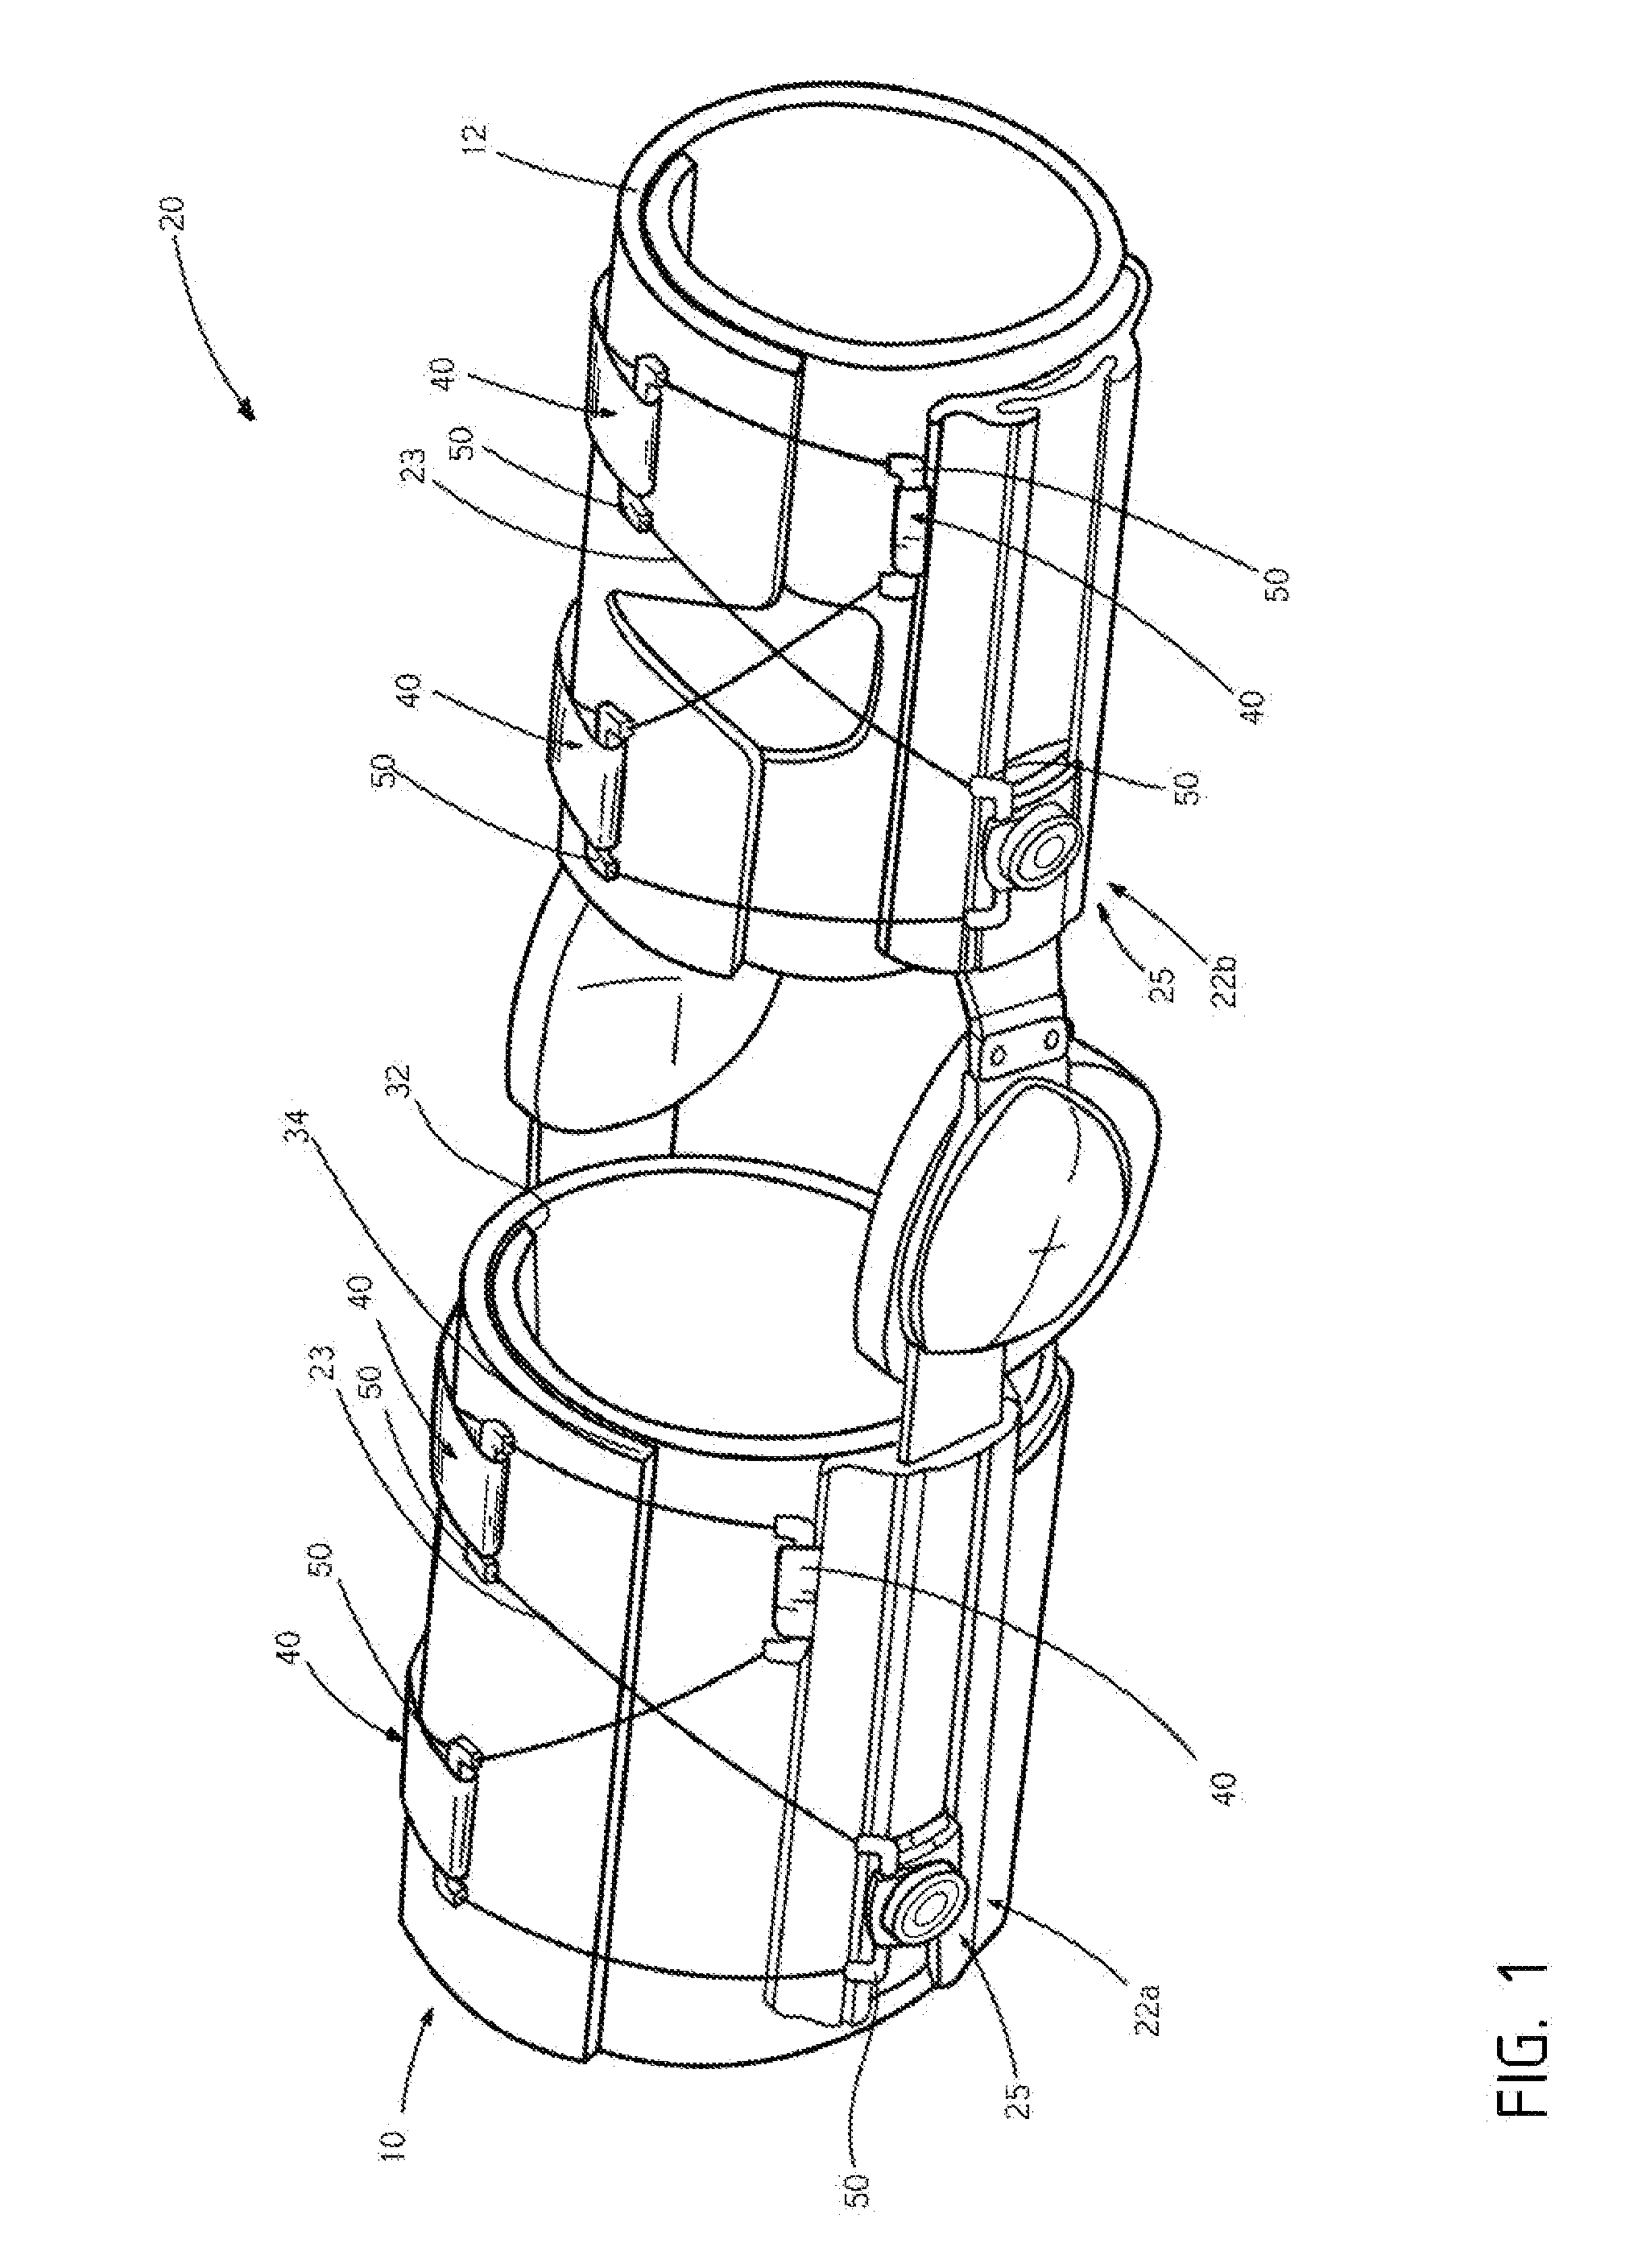 Methods and devices for providing automatic closure of prosthetics and orthotics